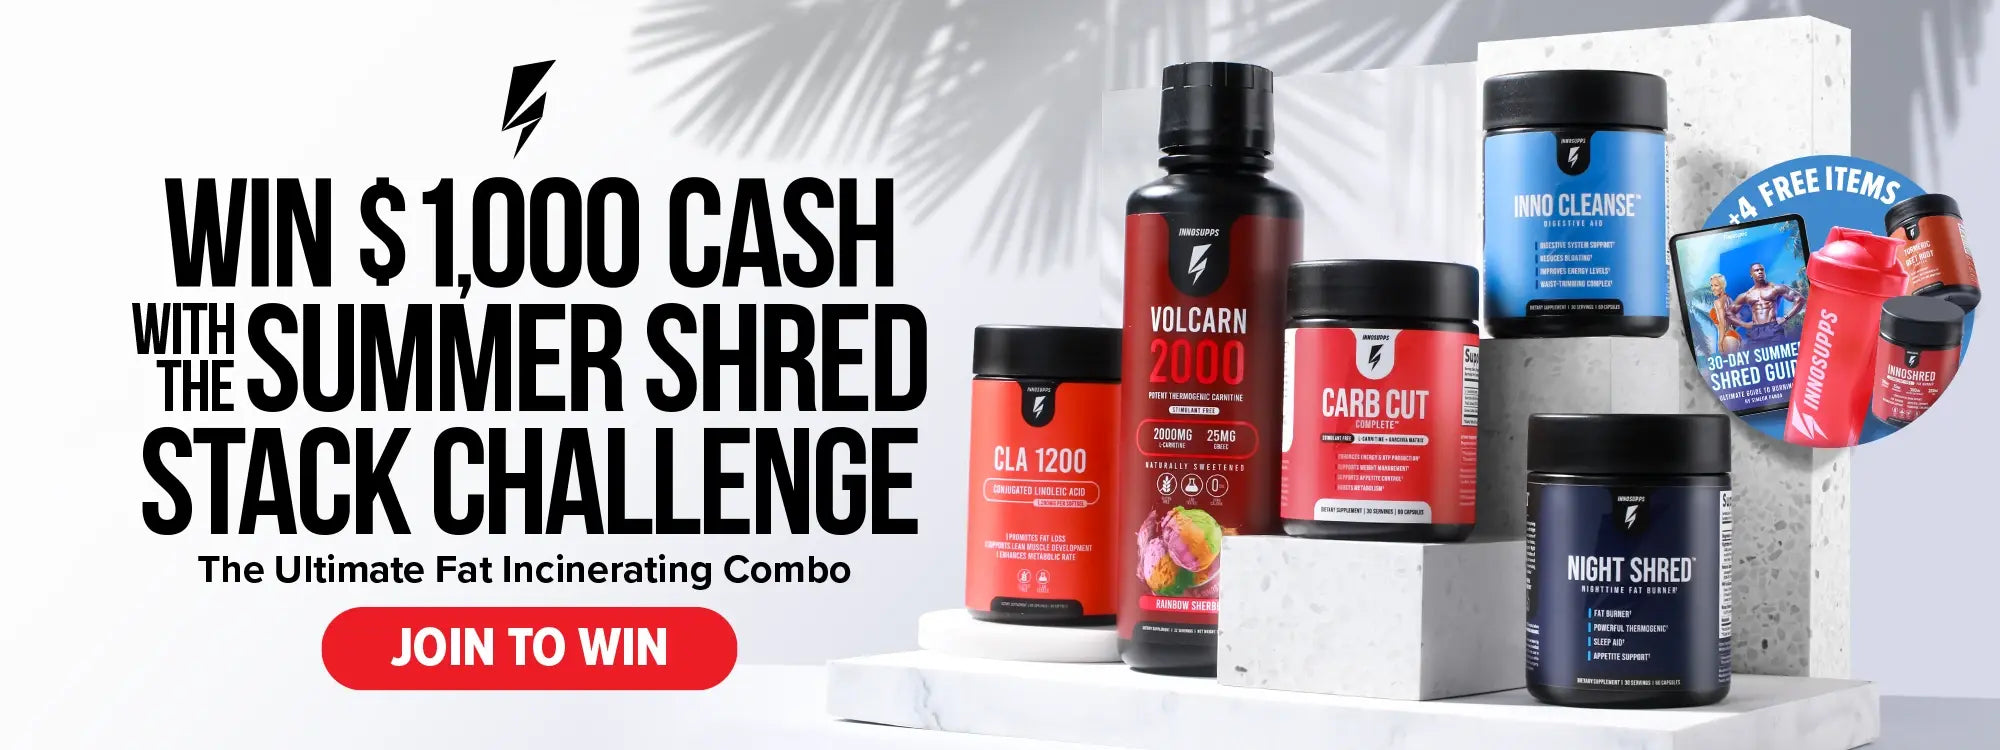 Win $1,000 Cash with the Summer Shred Stack Challenge